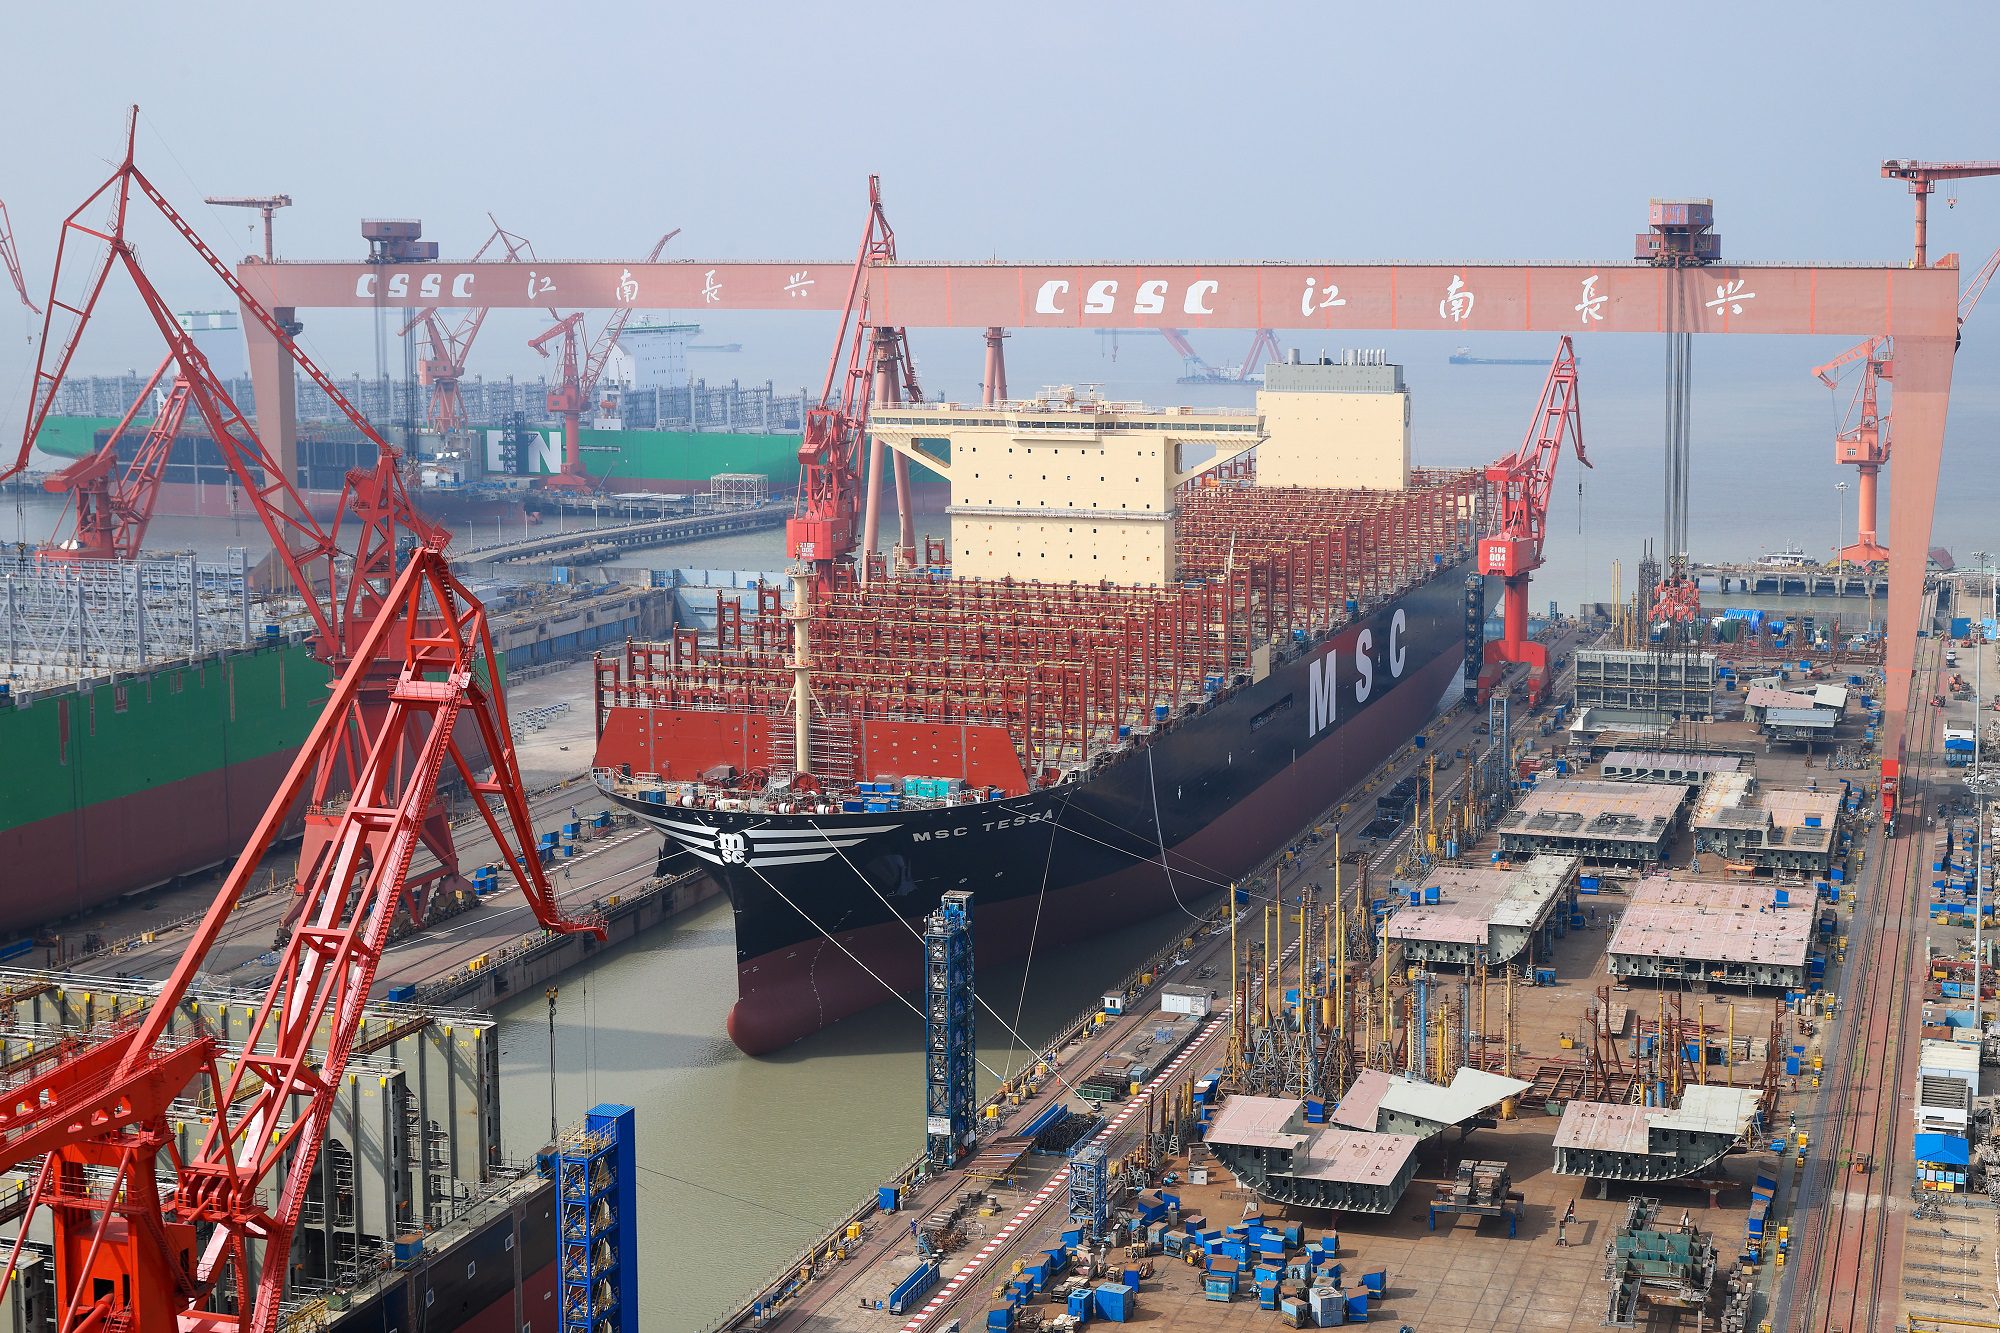 MSC Tessa, one of the world's largest containerships, under construction at Hudong-Zhonghua Shipbuilding in Shanghai, China. Photo courtesy CSSC.